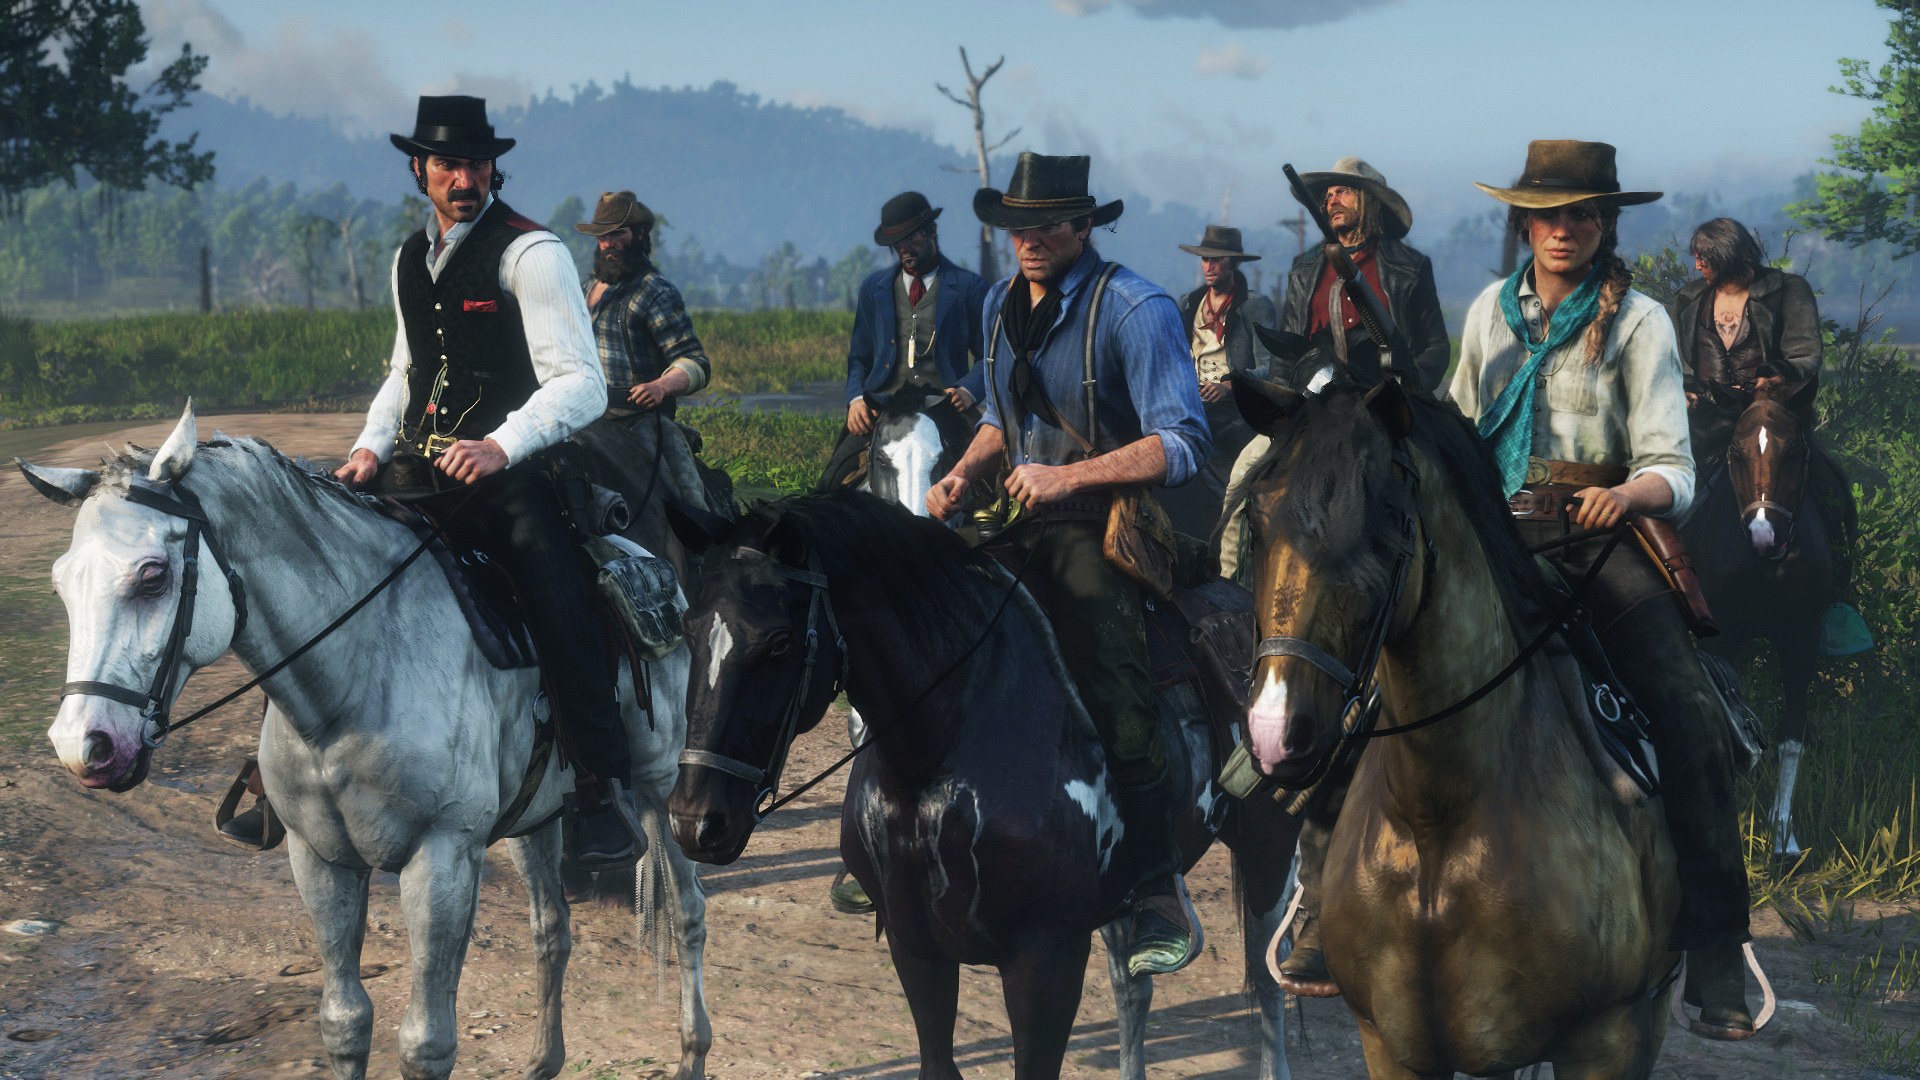 Red Dead Redemption 2's PC Exclusive Content Comes to Consoles